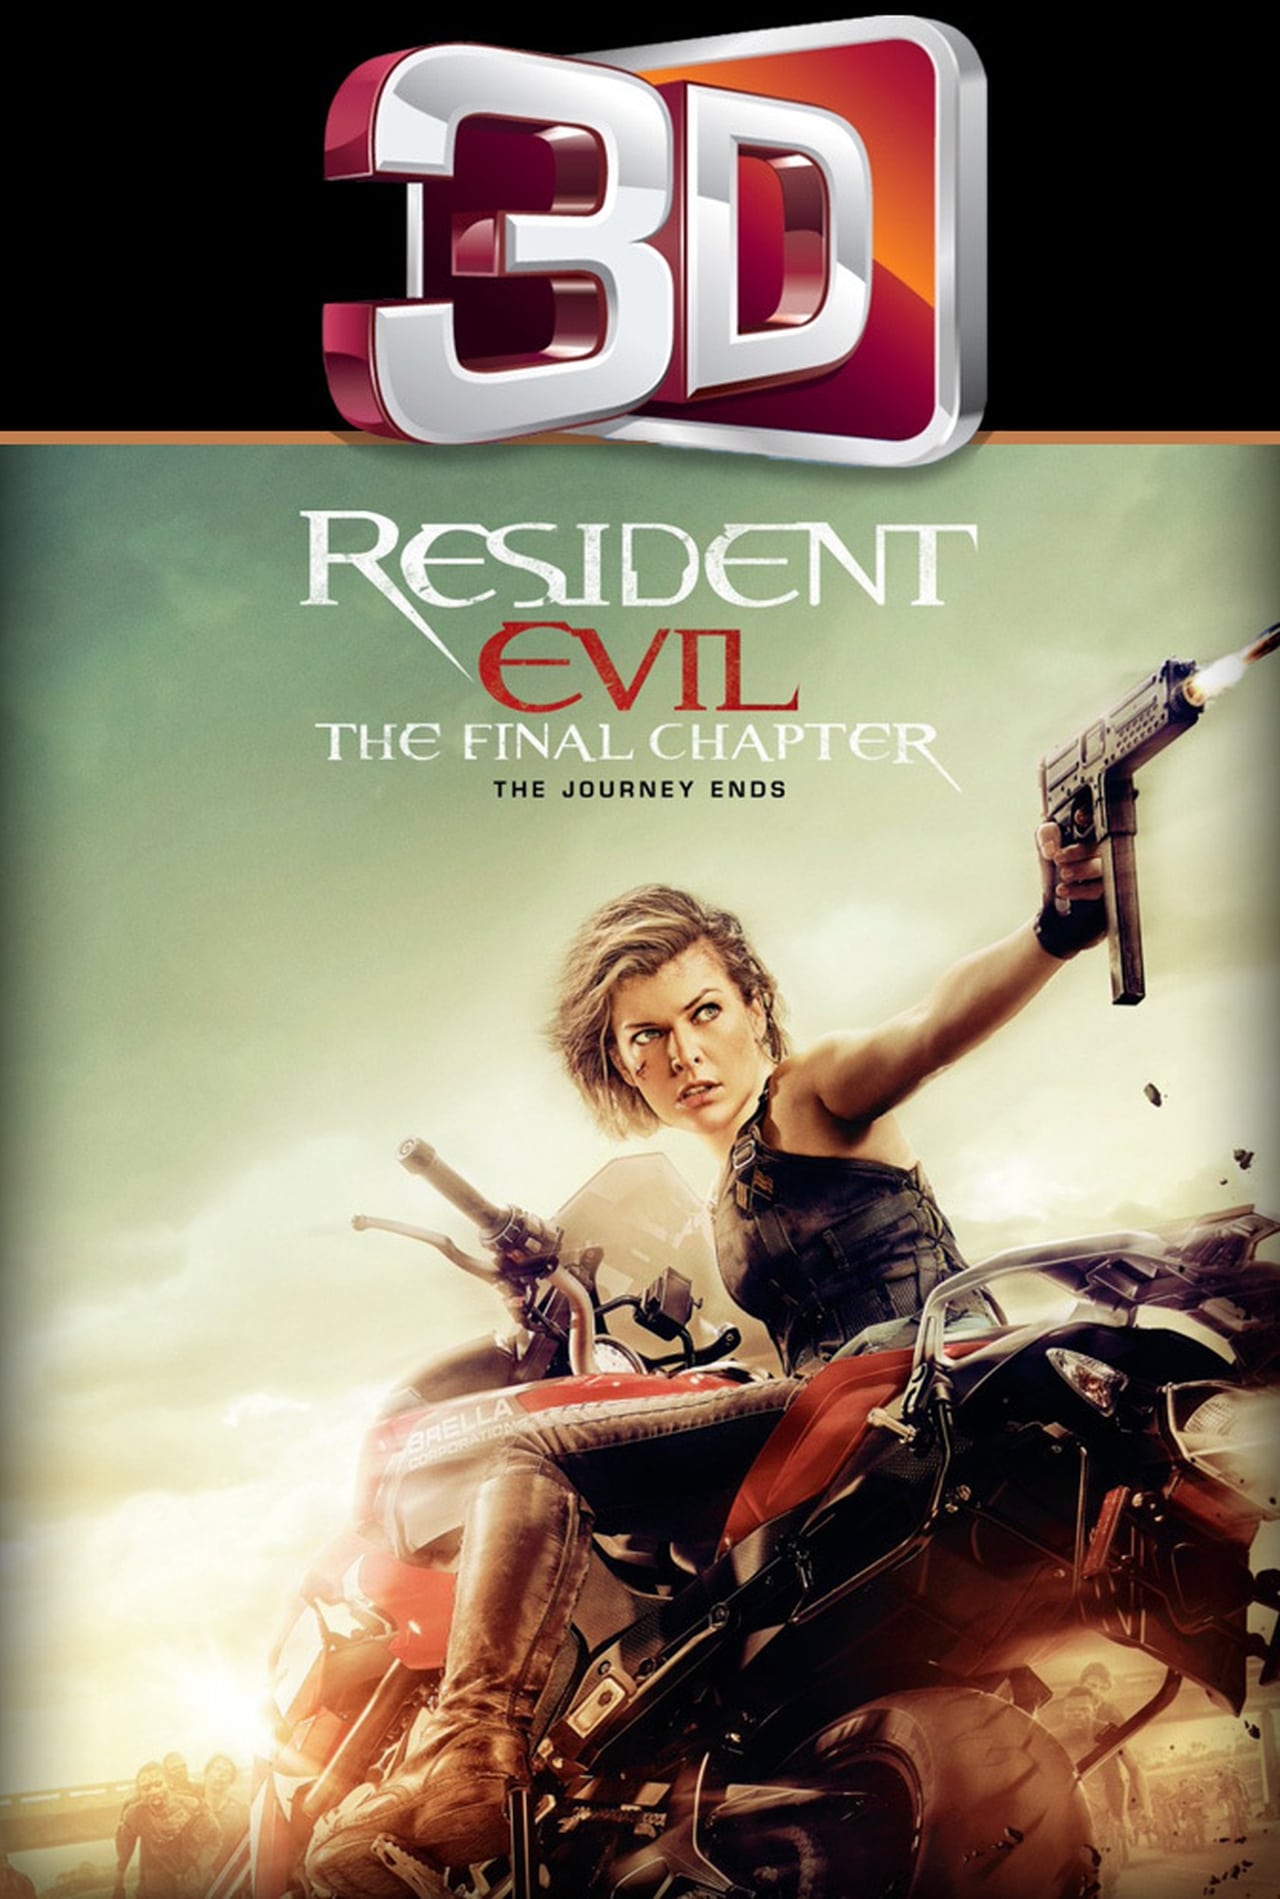 Resident Evil: The Final Chapter (2016) Theatrical Cut 640Kbps 23.976Fps 48Khz 5.1Ch BluRay Turkish Audio TAC